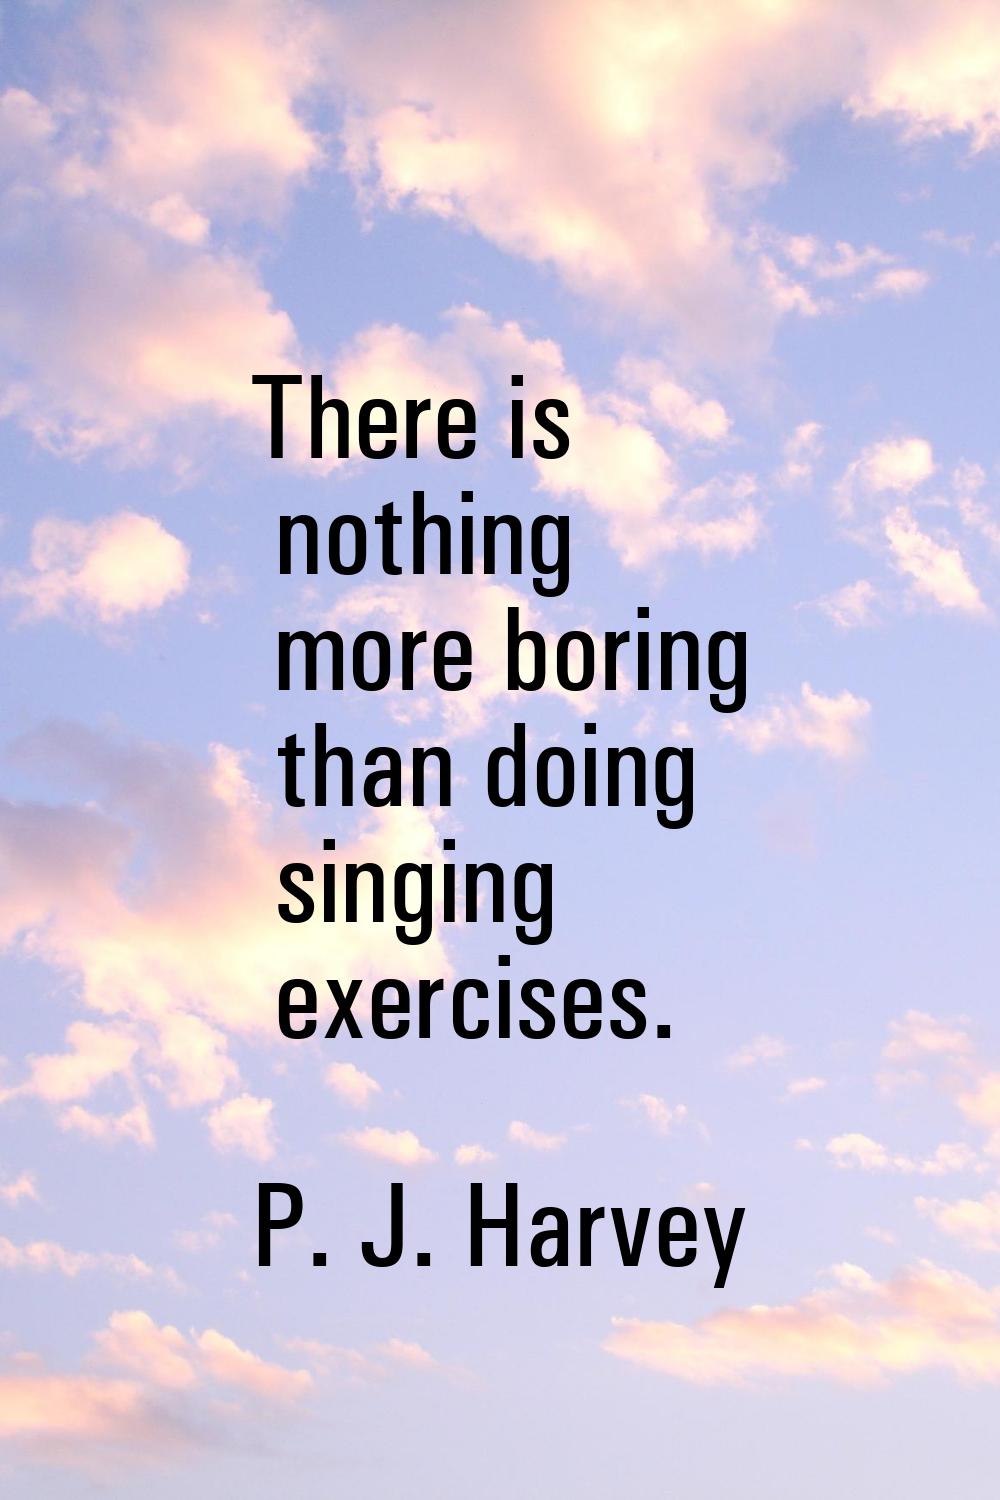 There is nothing more boring than doing singing exercises.